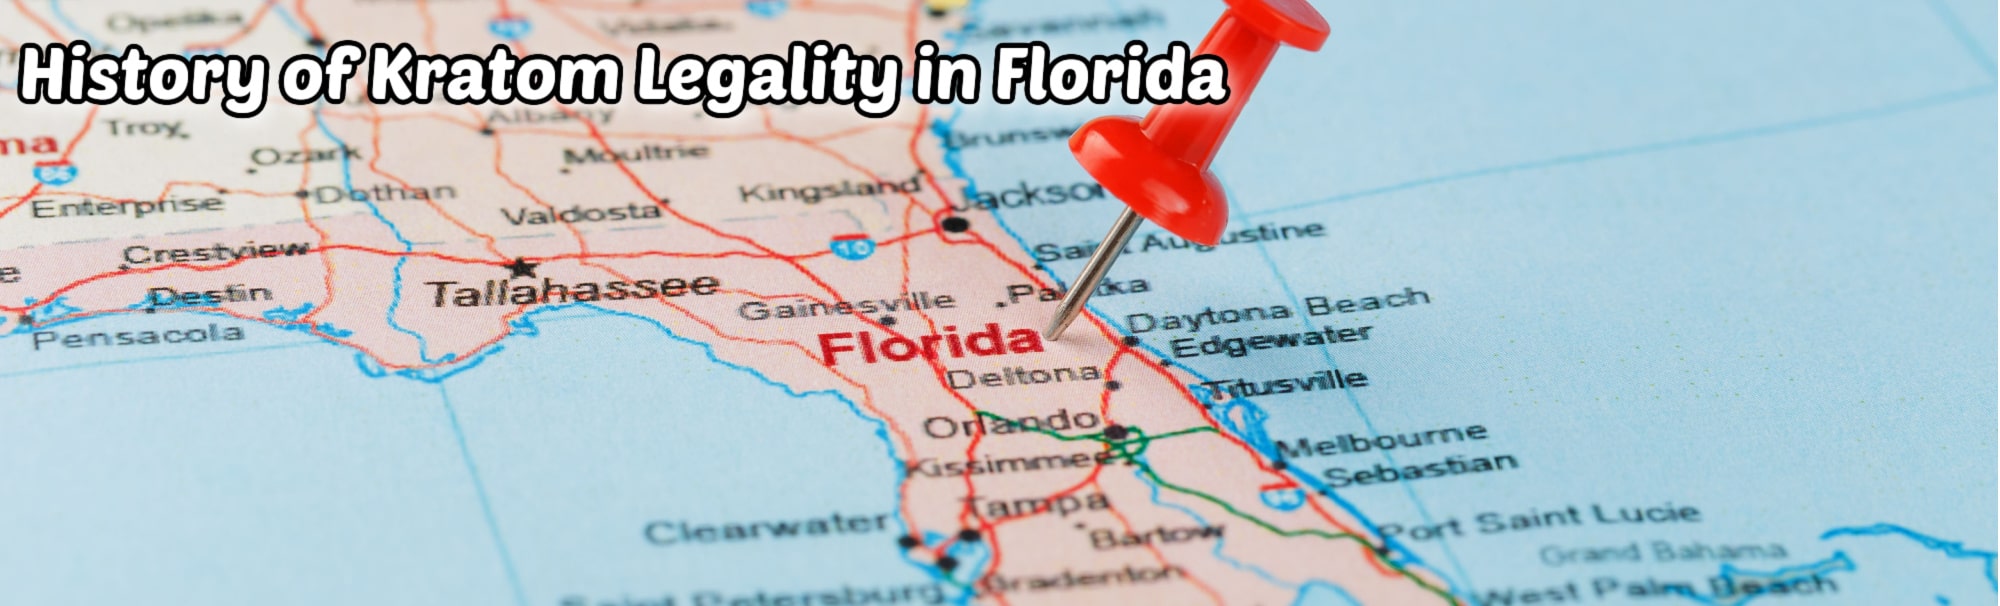 image of history of kratom legality in florida